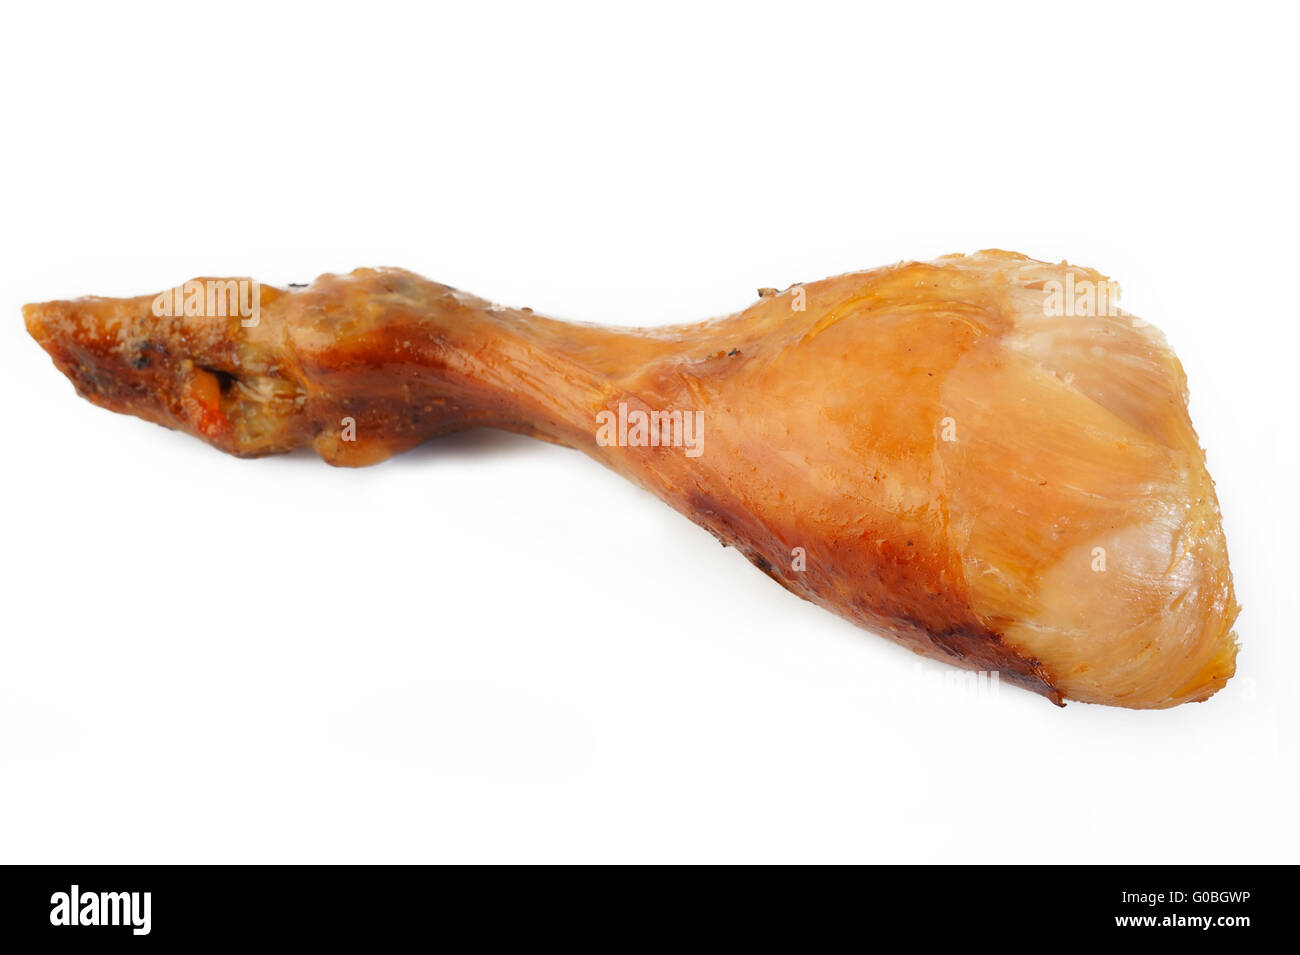 Baked chicken drumstick on white background Stock Photo